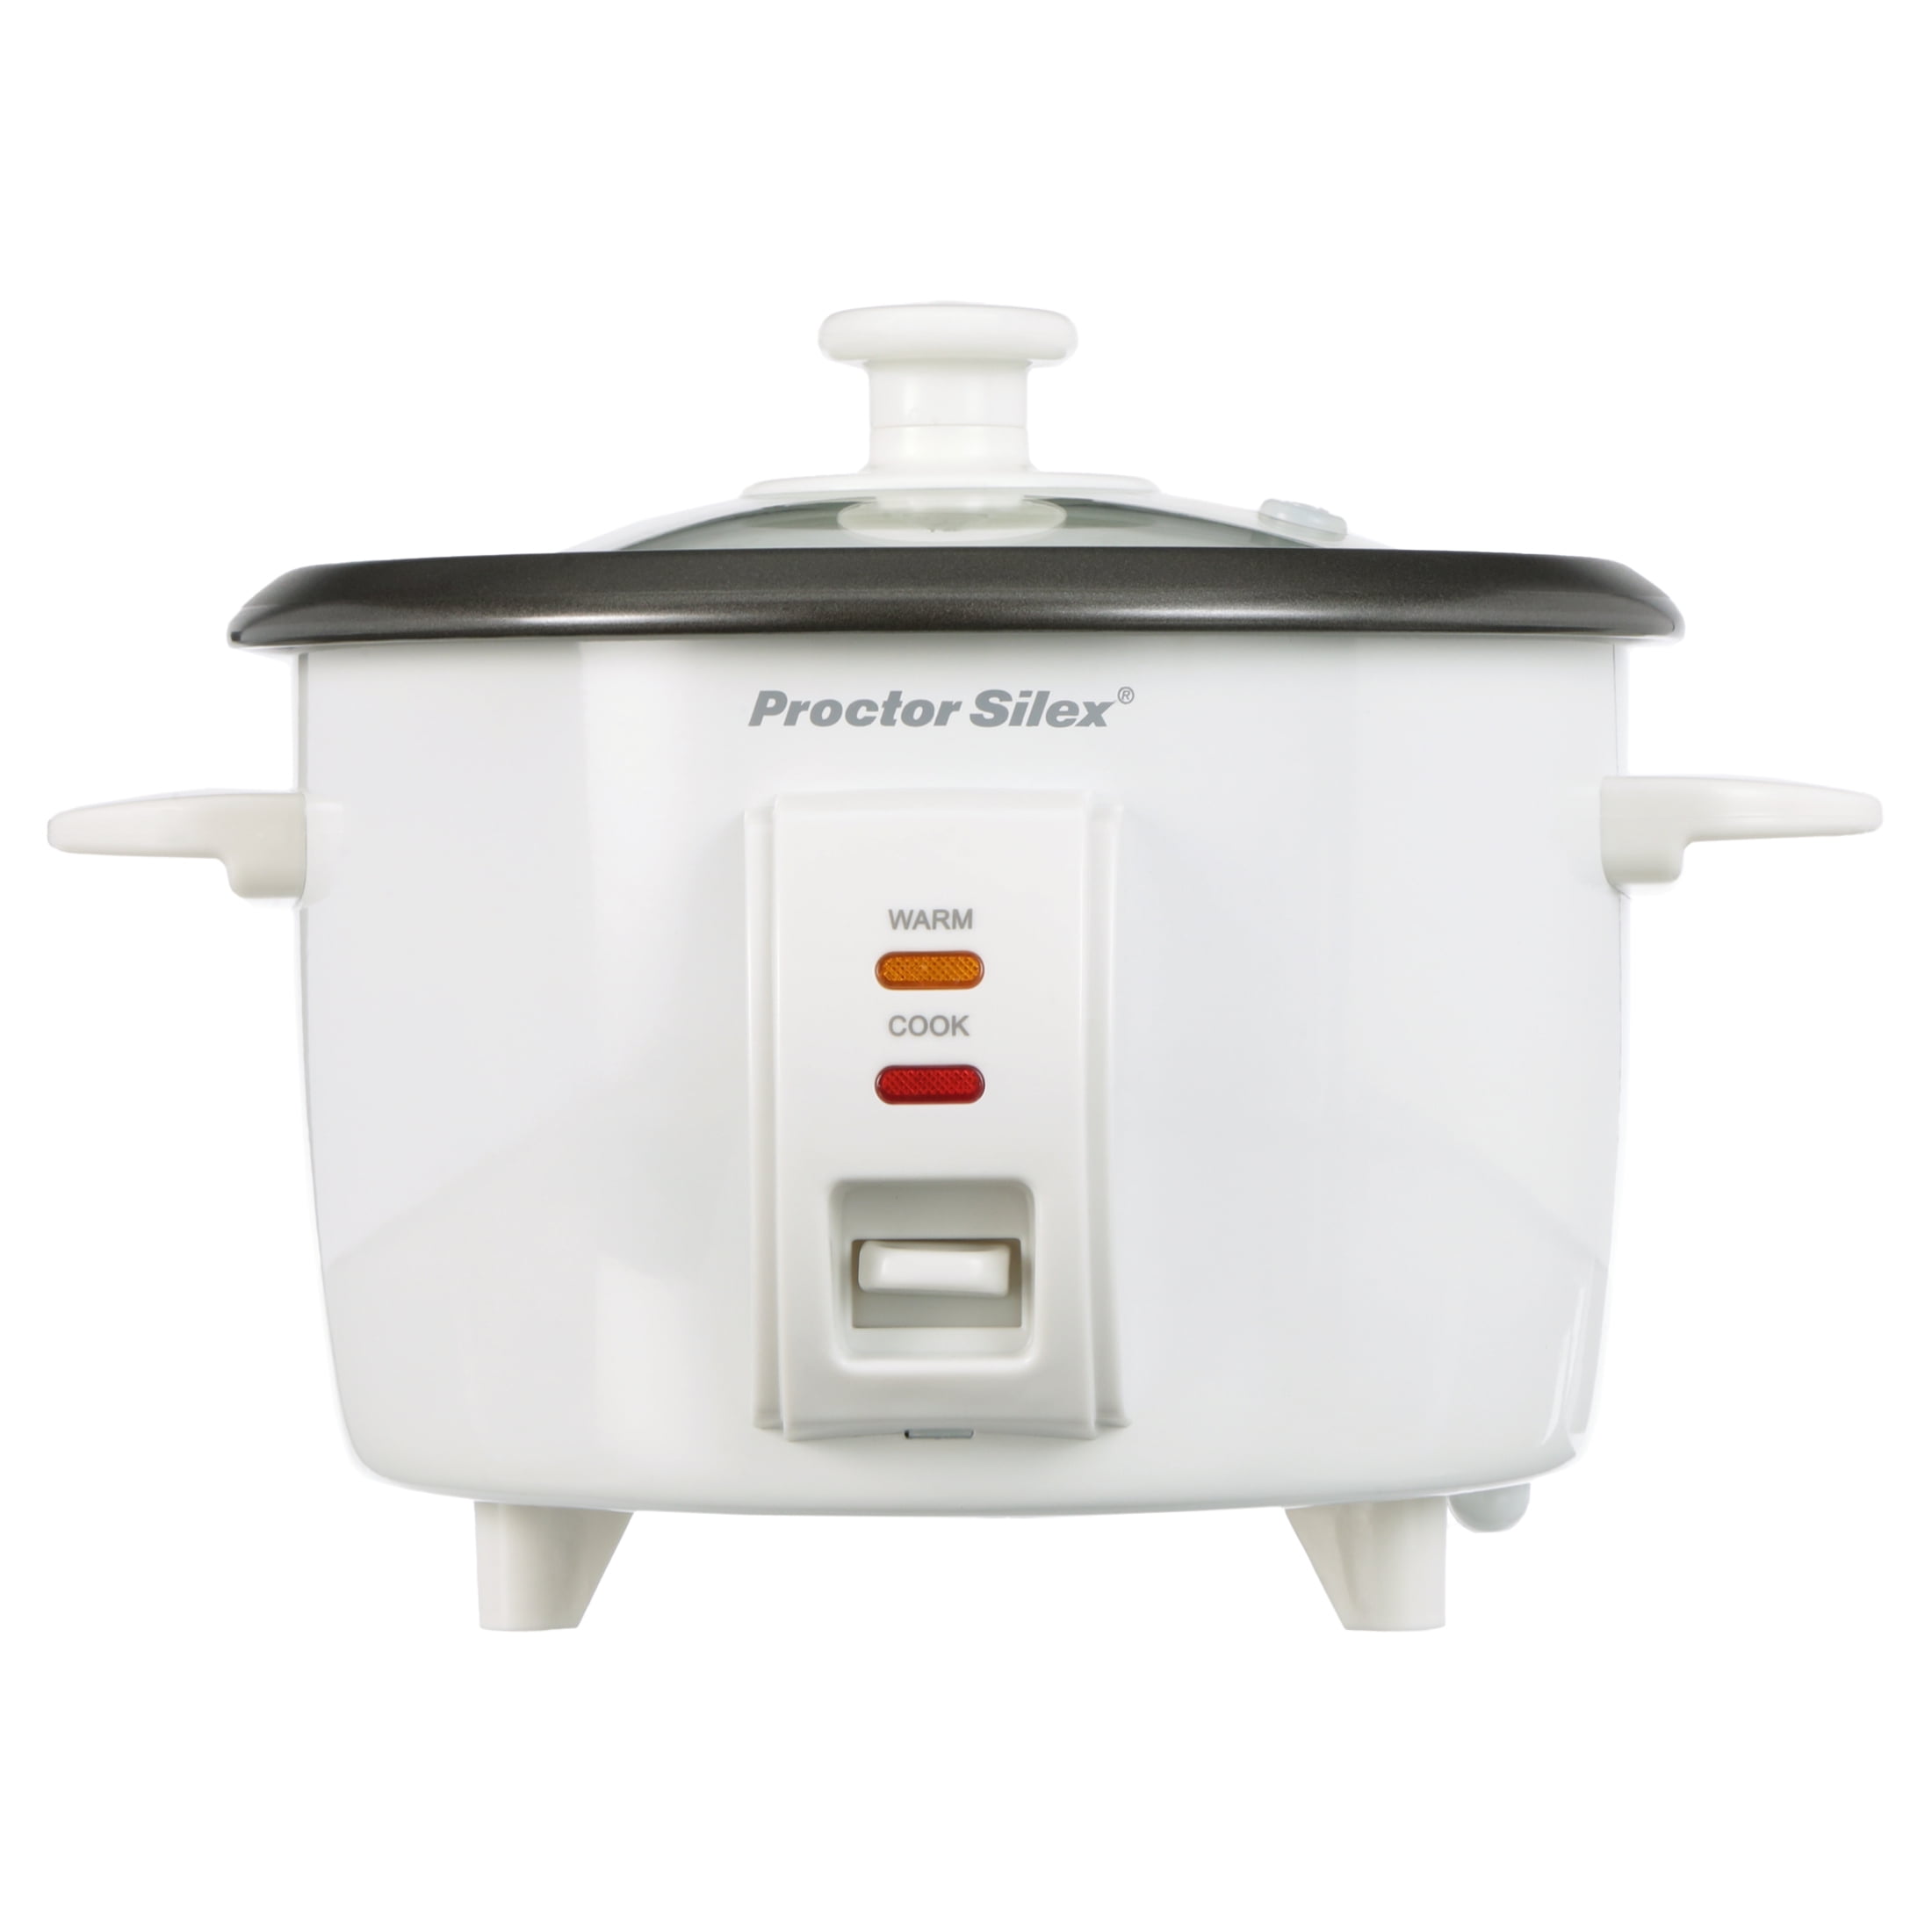 Proctor Silex 8-Cup Rice cooker White 37534NR - Best Buy